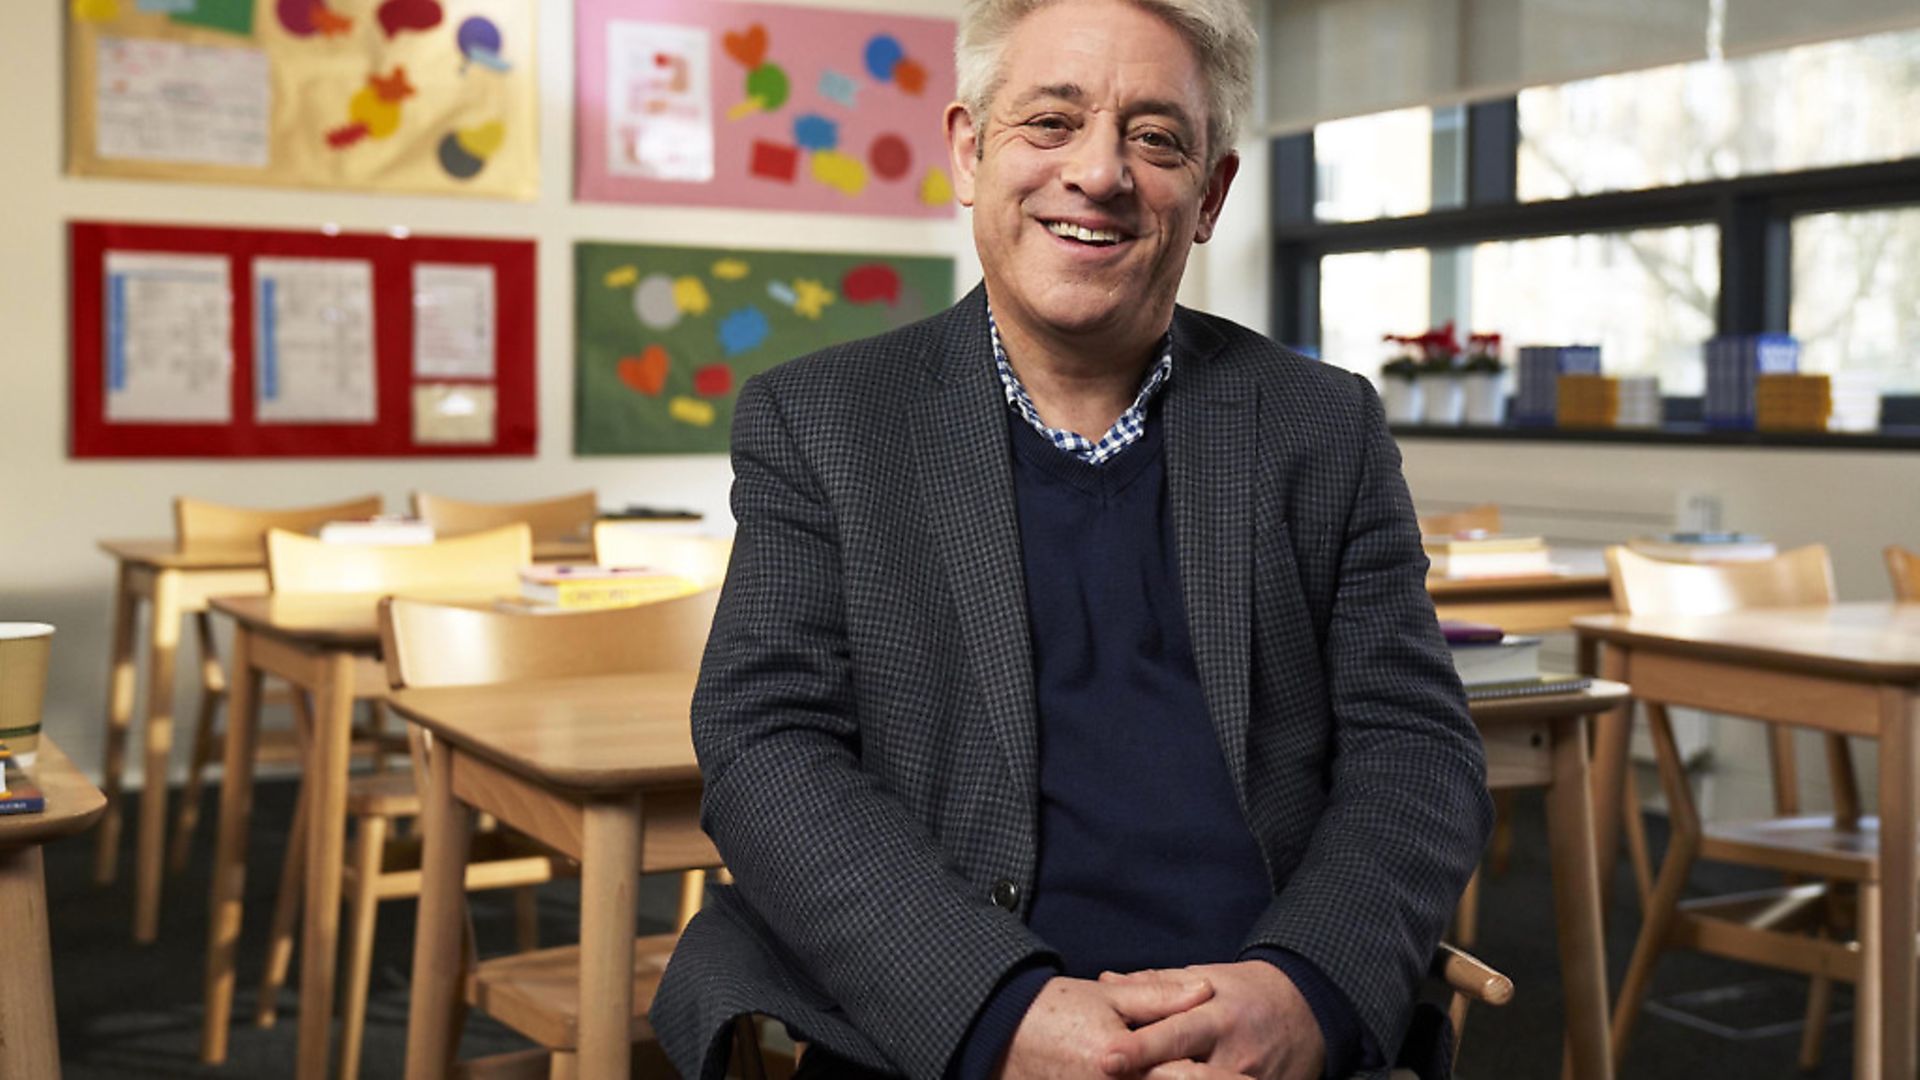 John Bercow will deliver Channel 4's alternative Christmas message. Photograph: Mark Johnson/Channel 4/PA. - Credit: PA